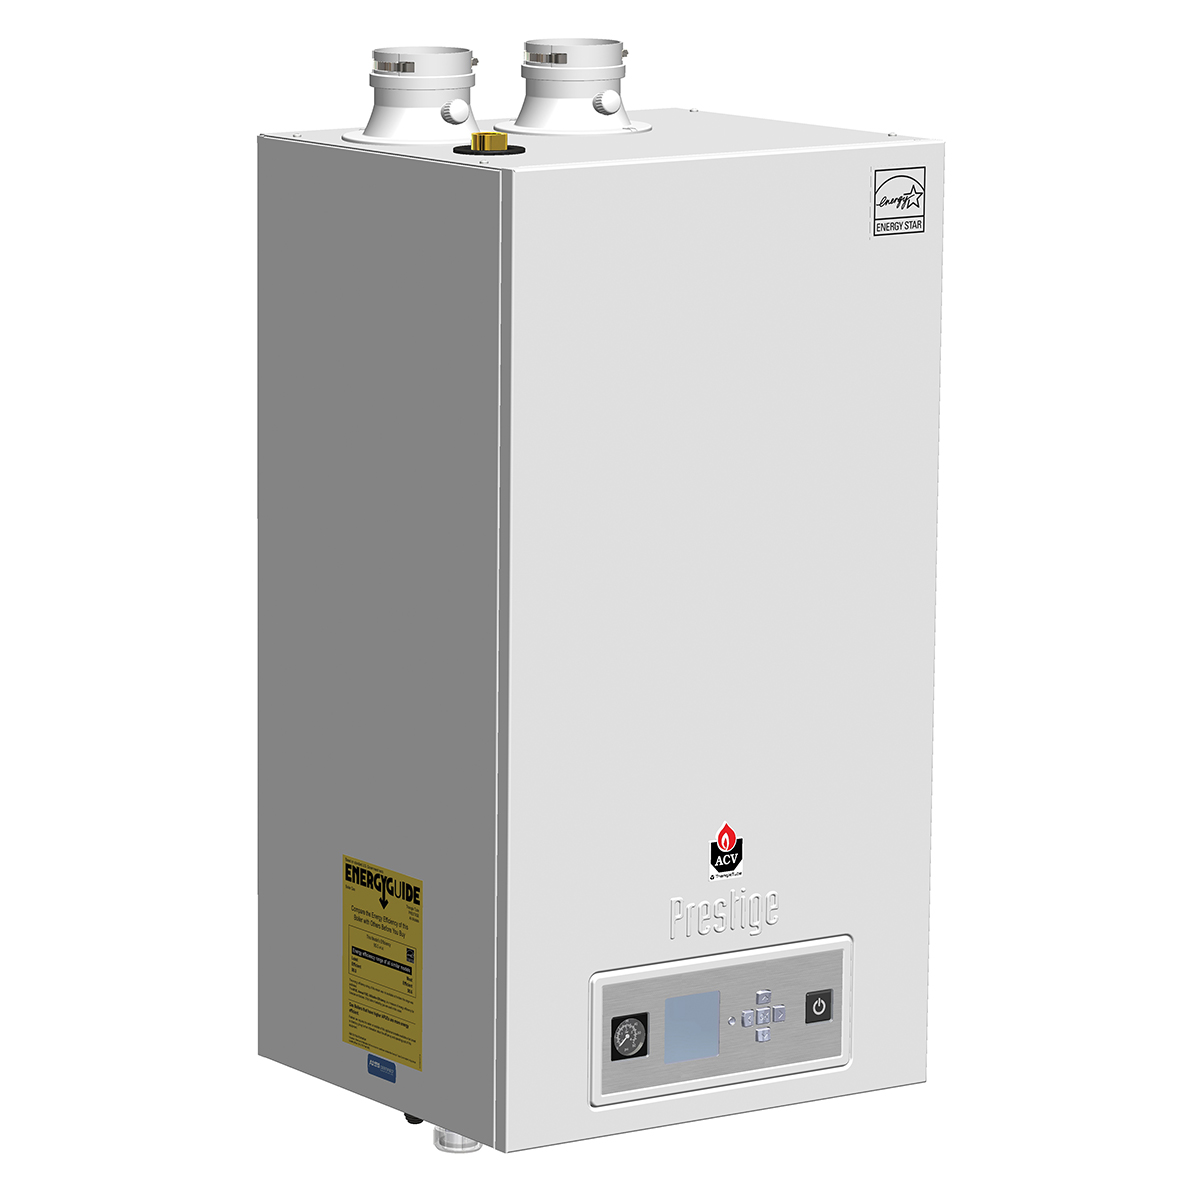 PA80 Prestige™ Solo High Efficiency Condensing Gas Boiler, Natural/Liquid Propane Fuel, Stainless Steel Housing